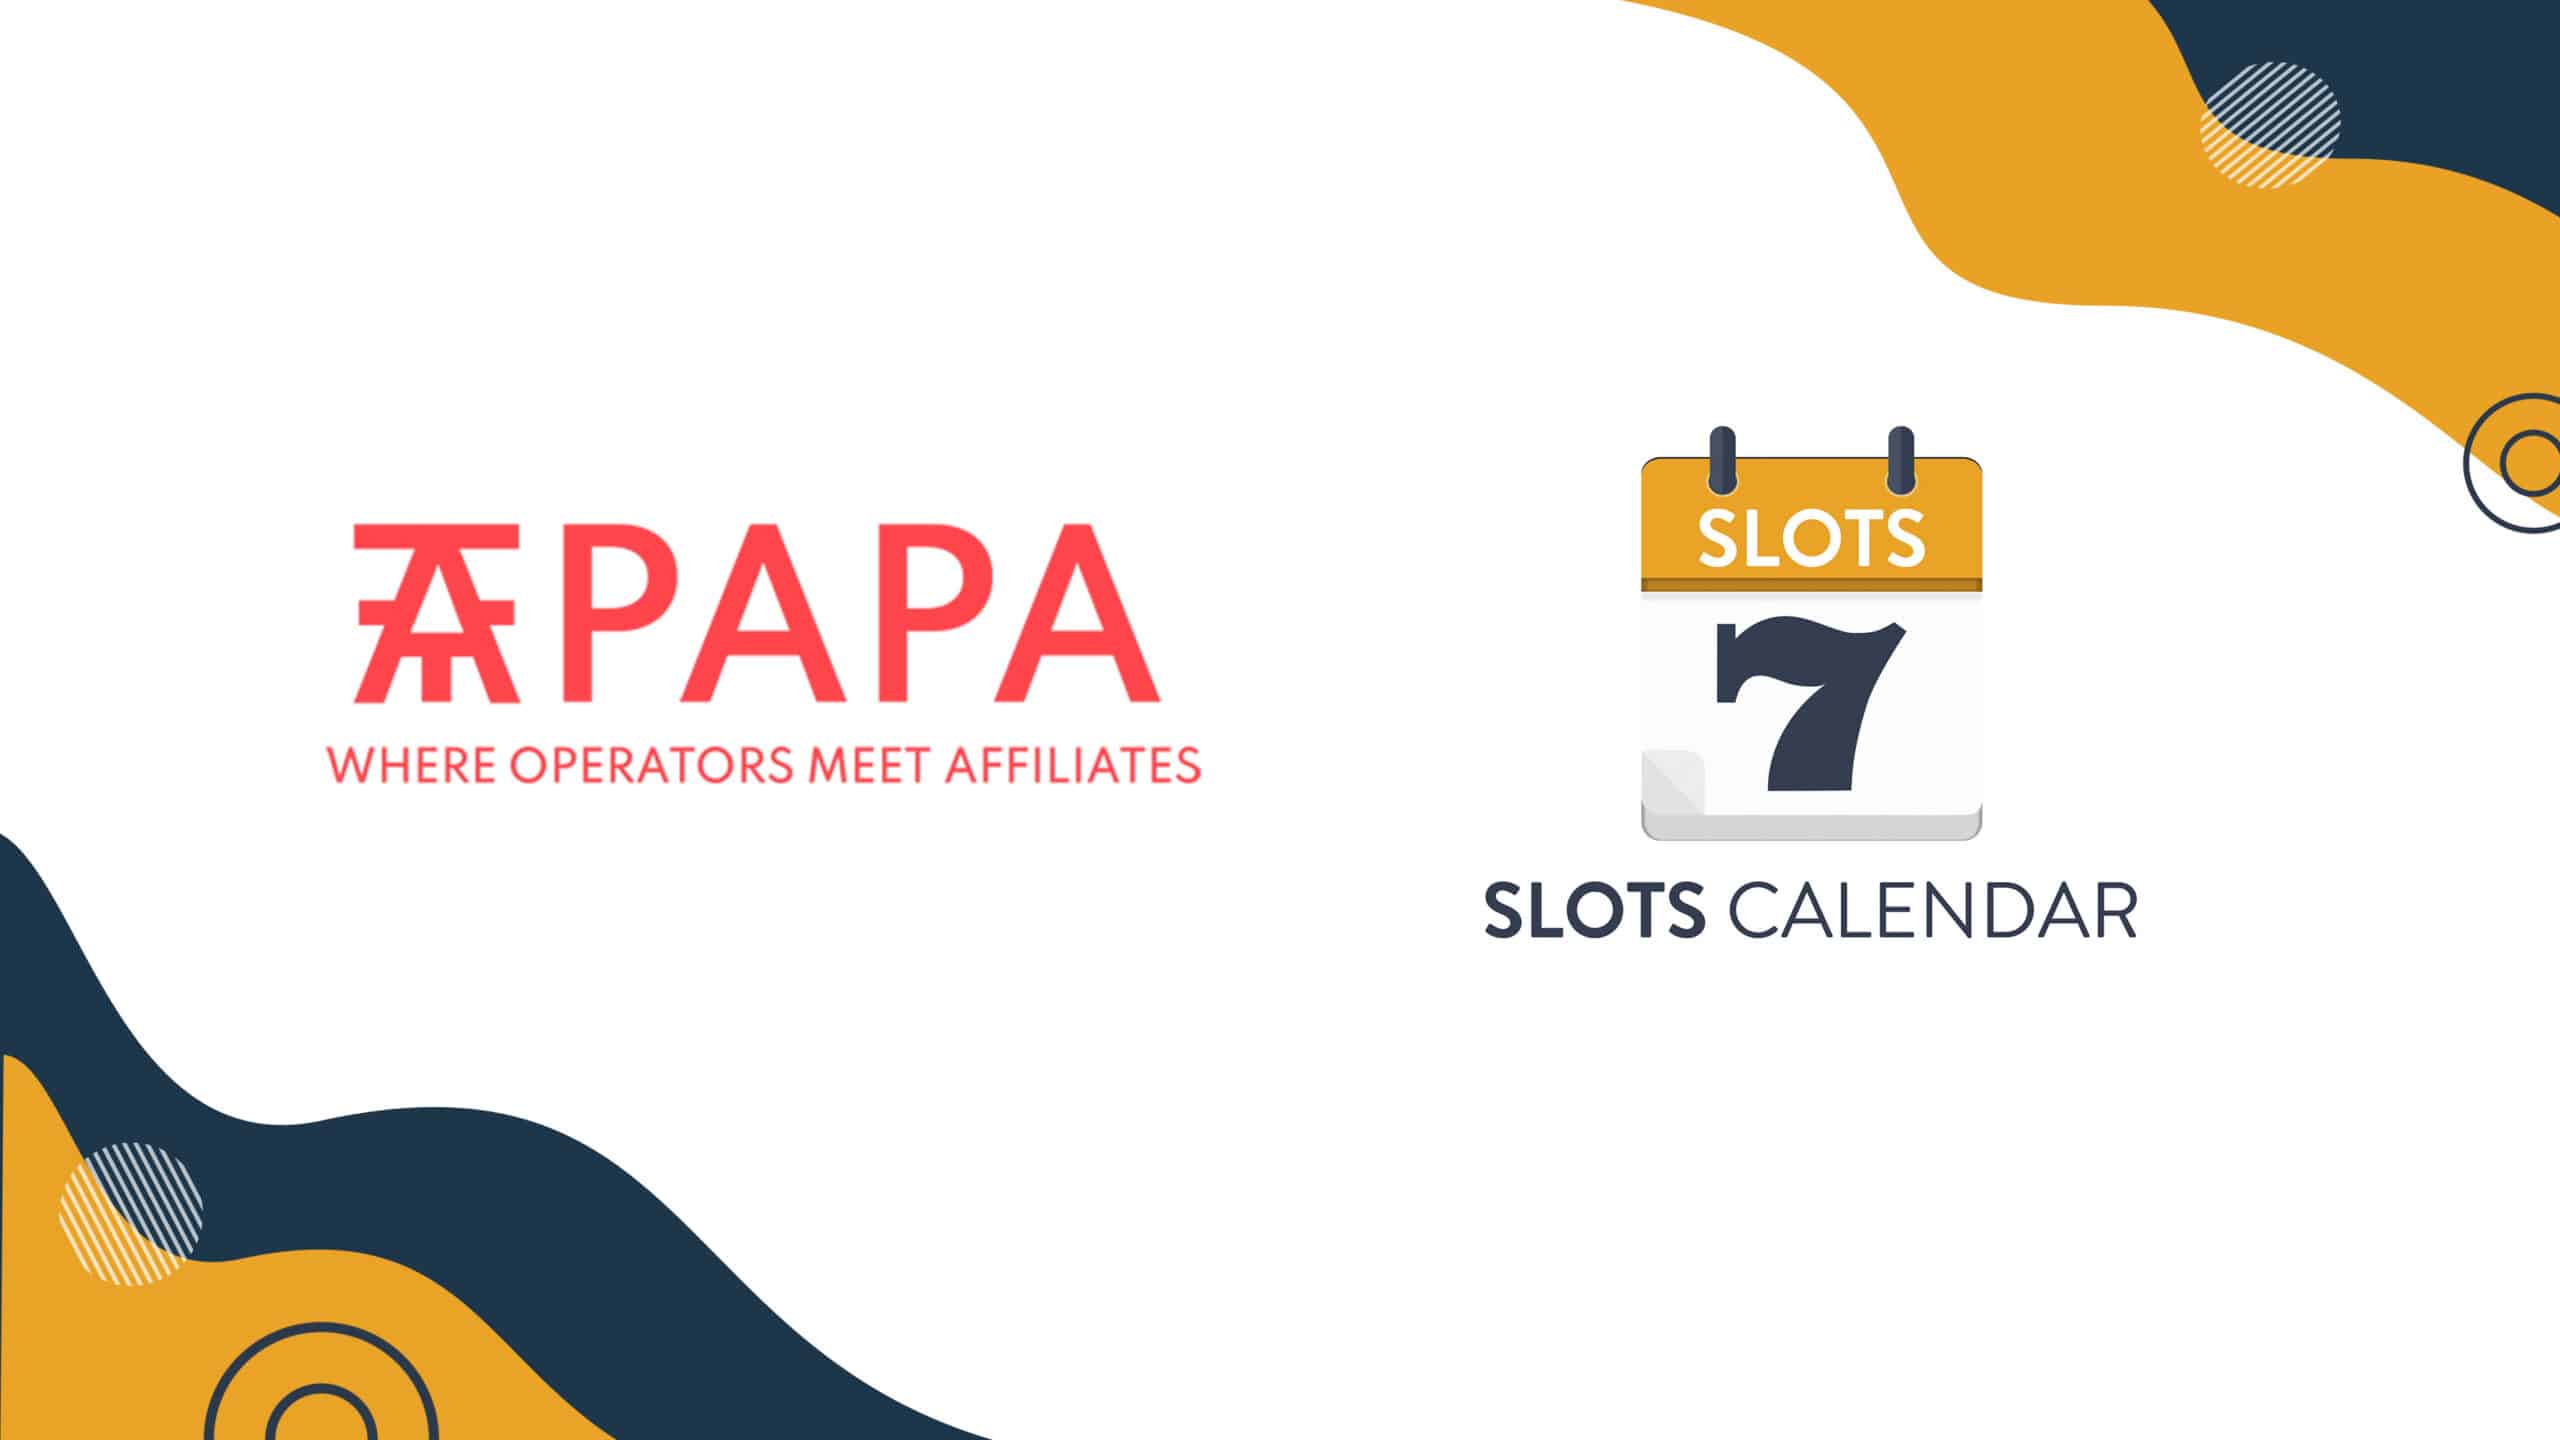 AffPapa continues directory’s expansion by welcoming Slots Calendar